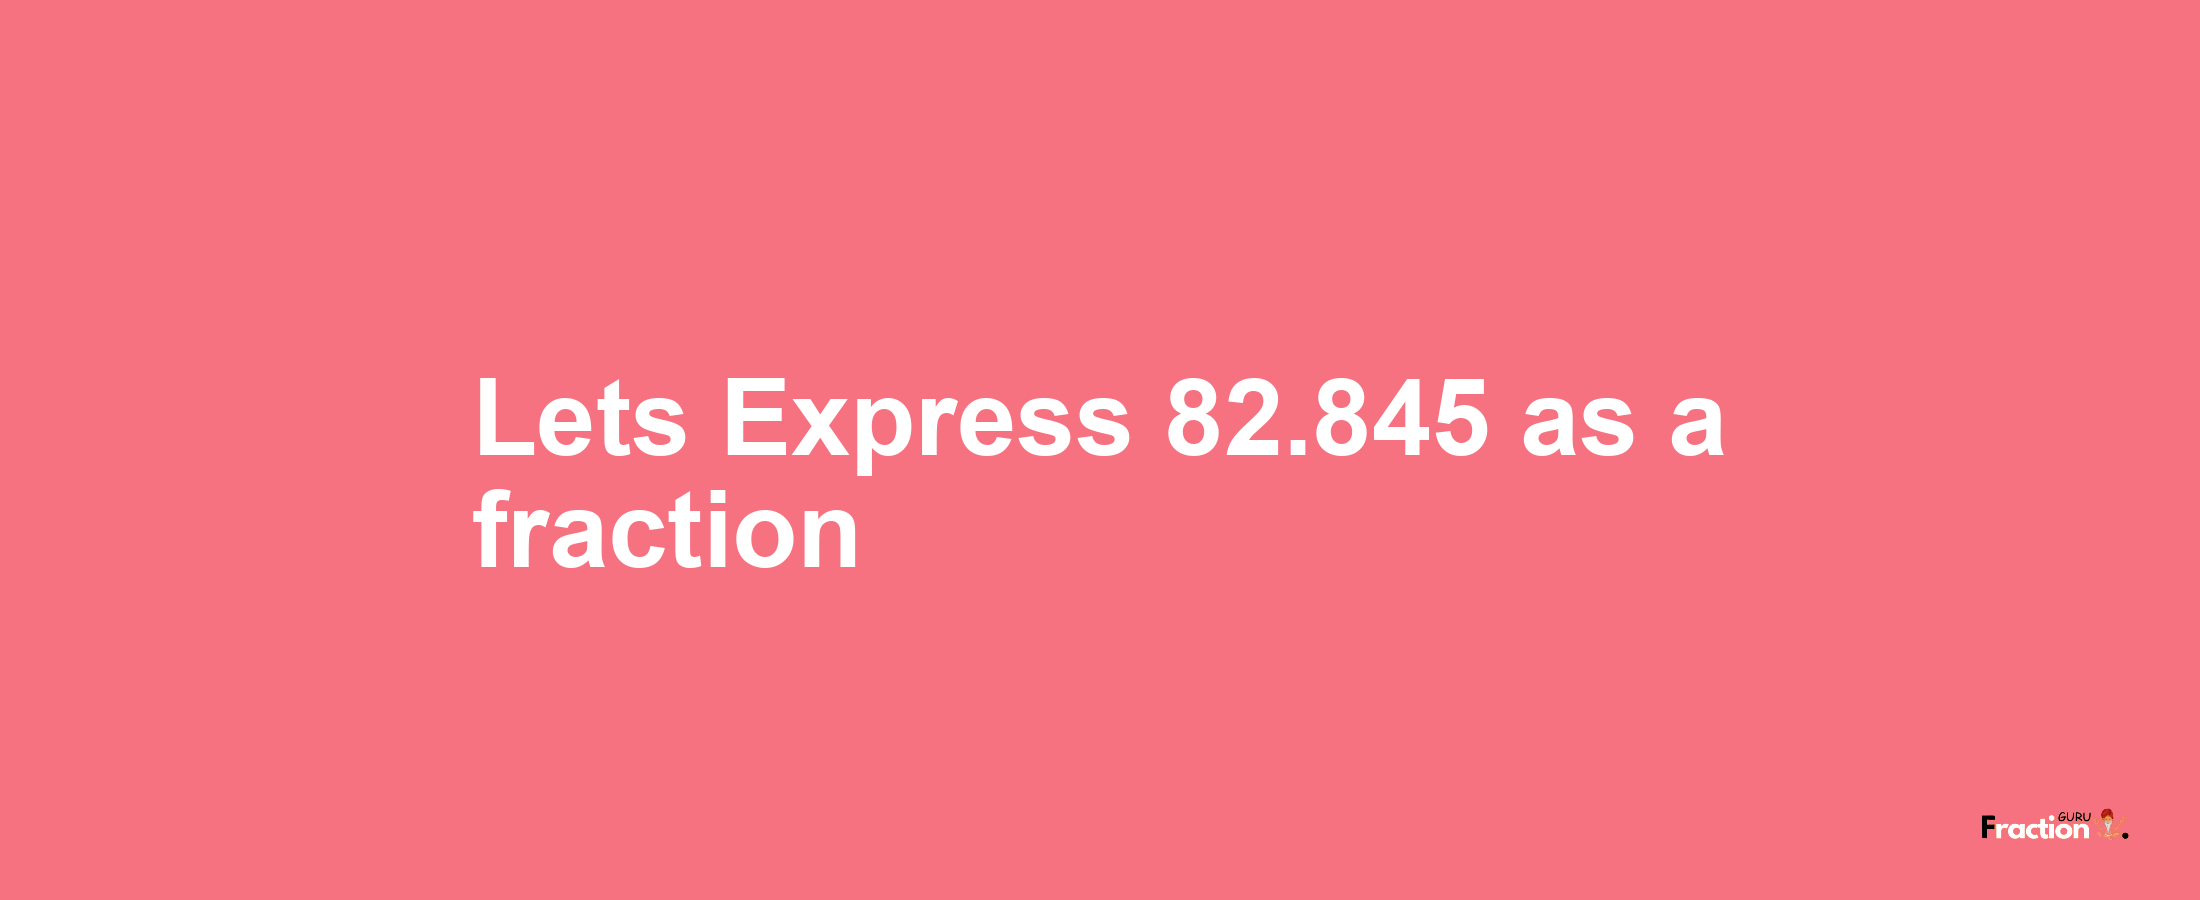 Lets Express 82.845 as afraction